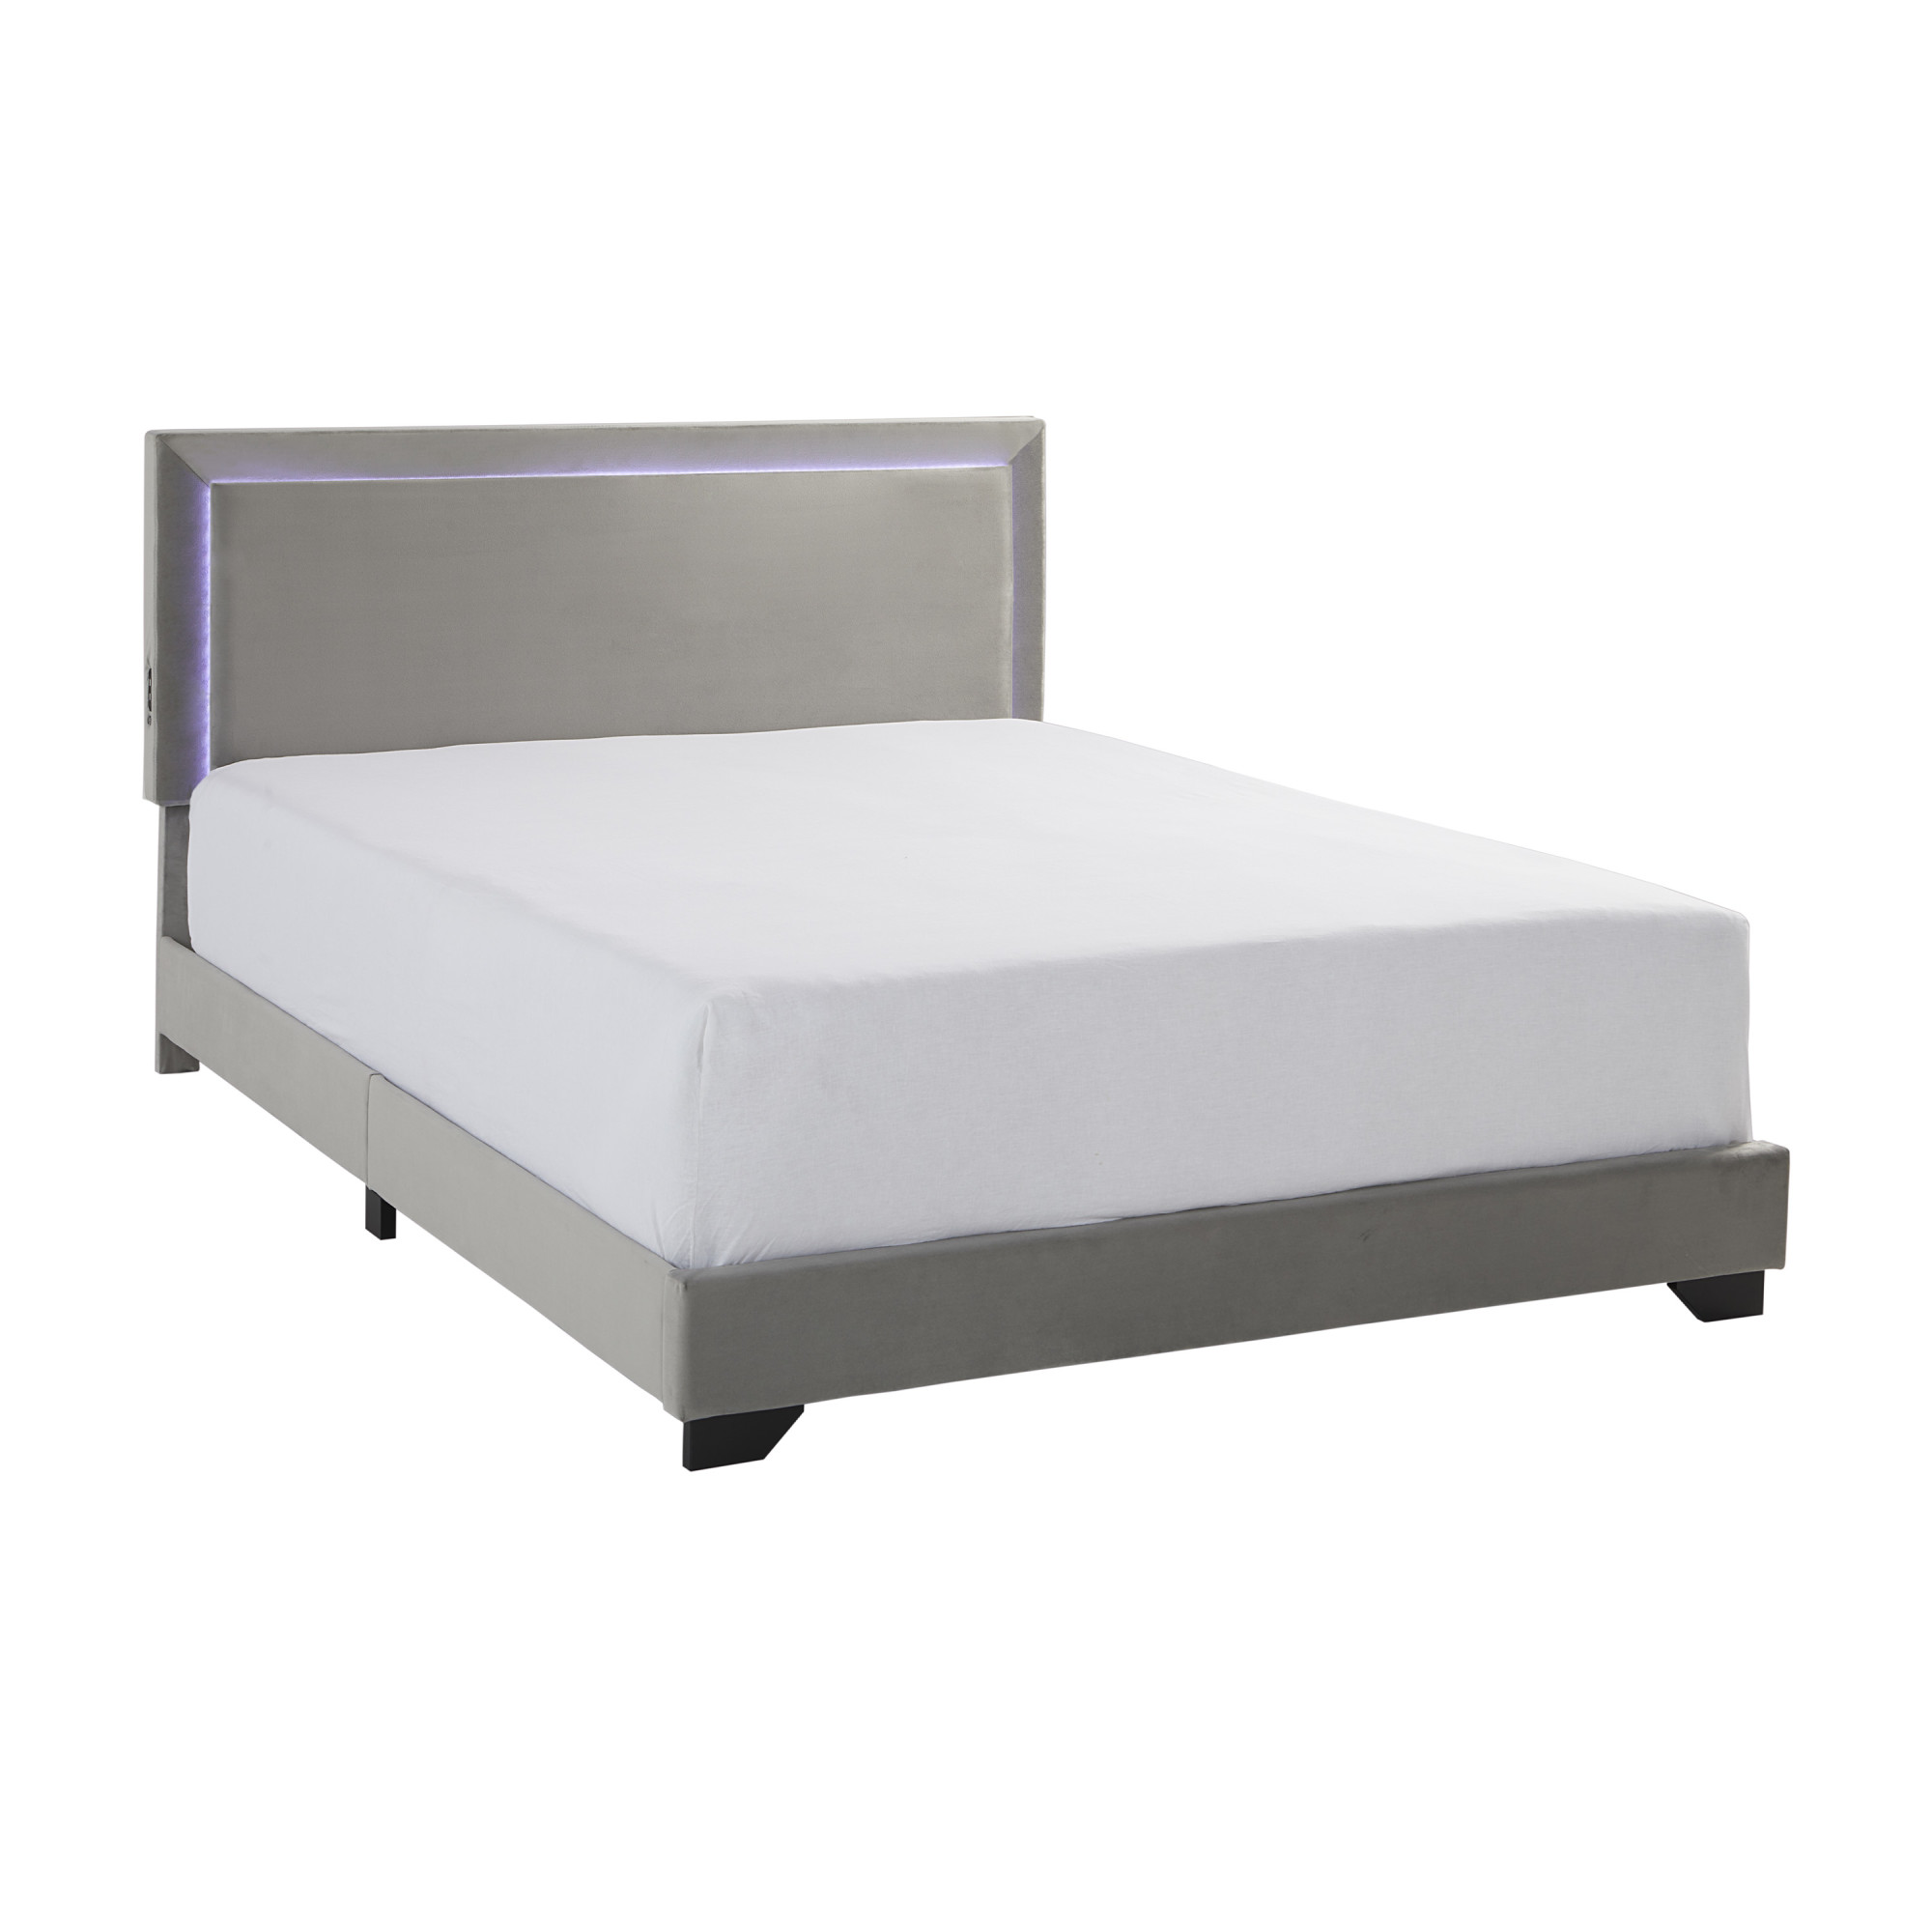 Anchorage Upholstered Queen Bed with LED Lights and USB, Platinum - image 15 of 17